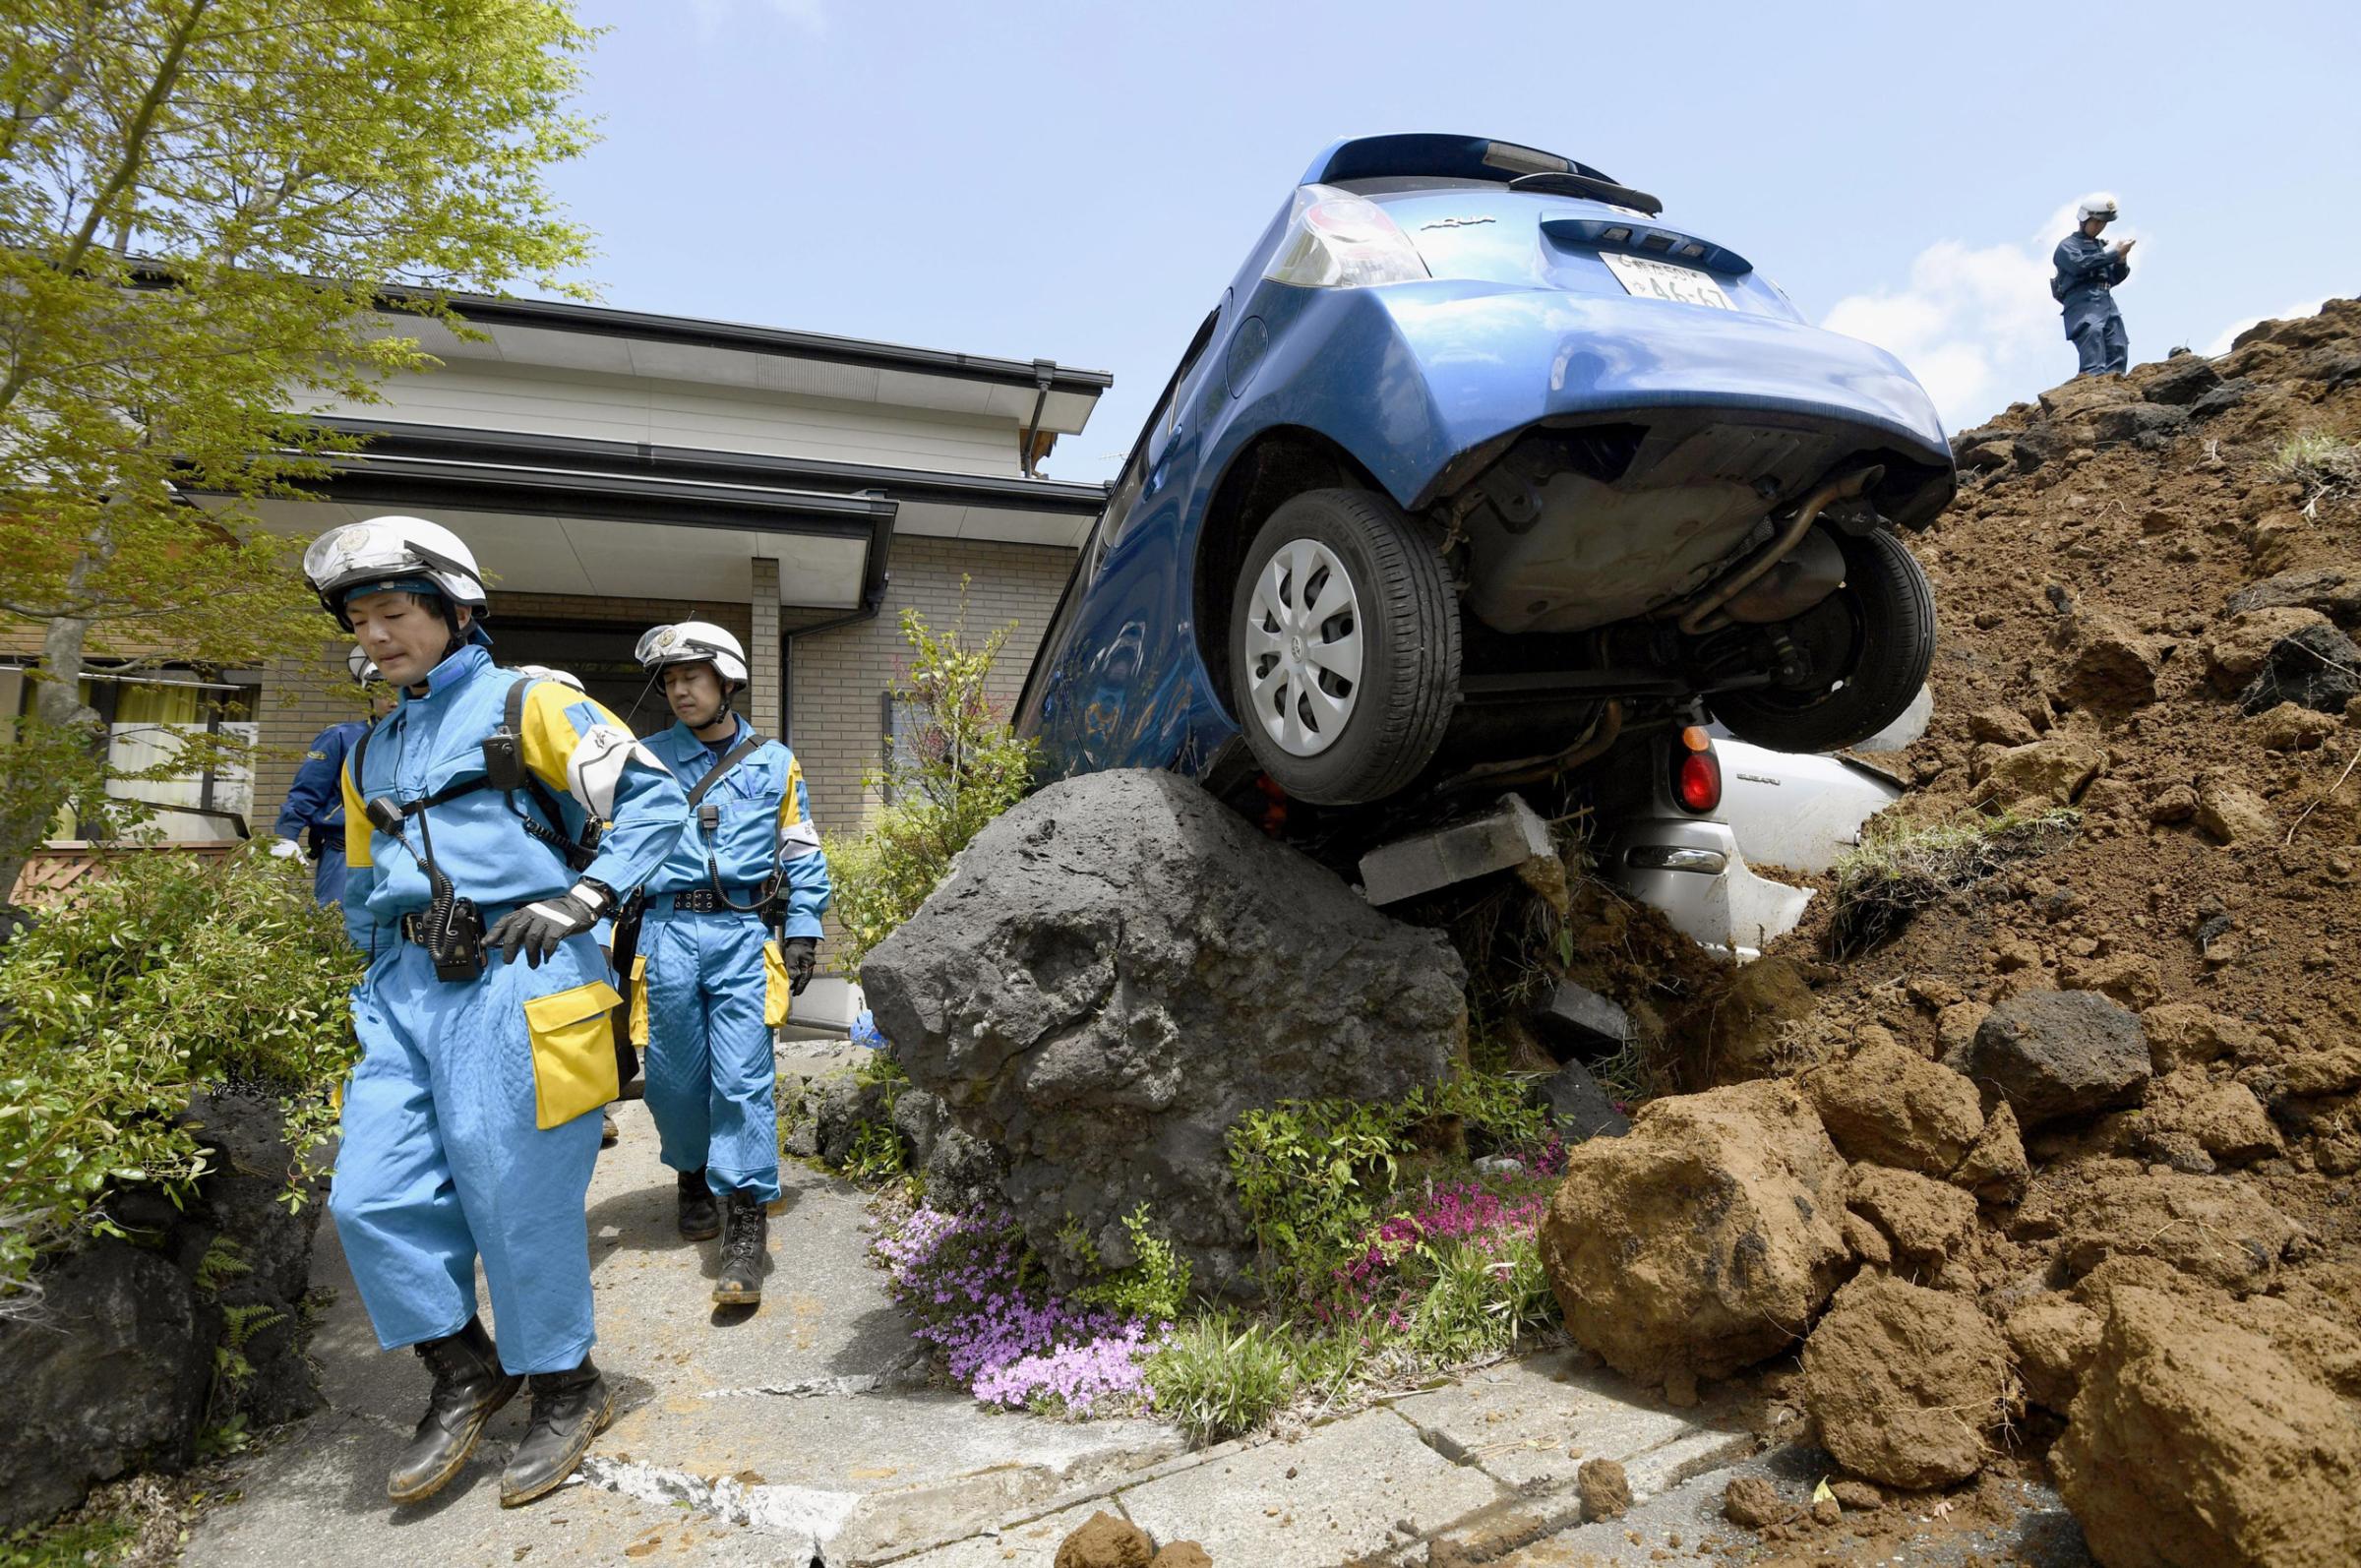 Police officers conduct a search operation at the site of a landslide caused by an earthquake in Minamiaso, Kumamoto prefecture, Japan, Sunday, April 17, 2016. Two nights of increasingly terrifying earthquakes flattened houses and triggered major landslides in southern Japan. (Yohei Fukai/Kyodo News via AP) JAPAN OUT, MANDATORY CREDIT